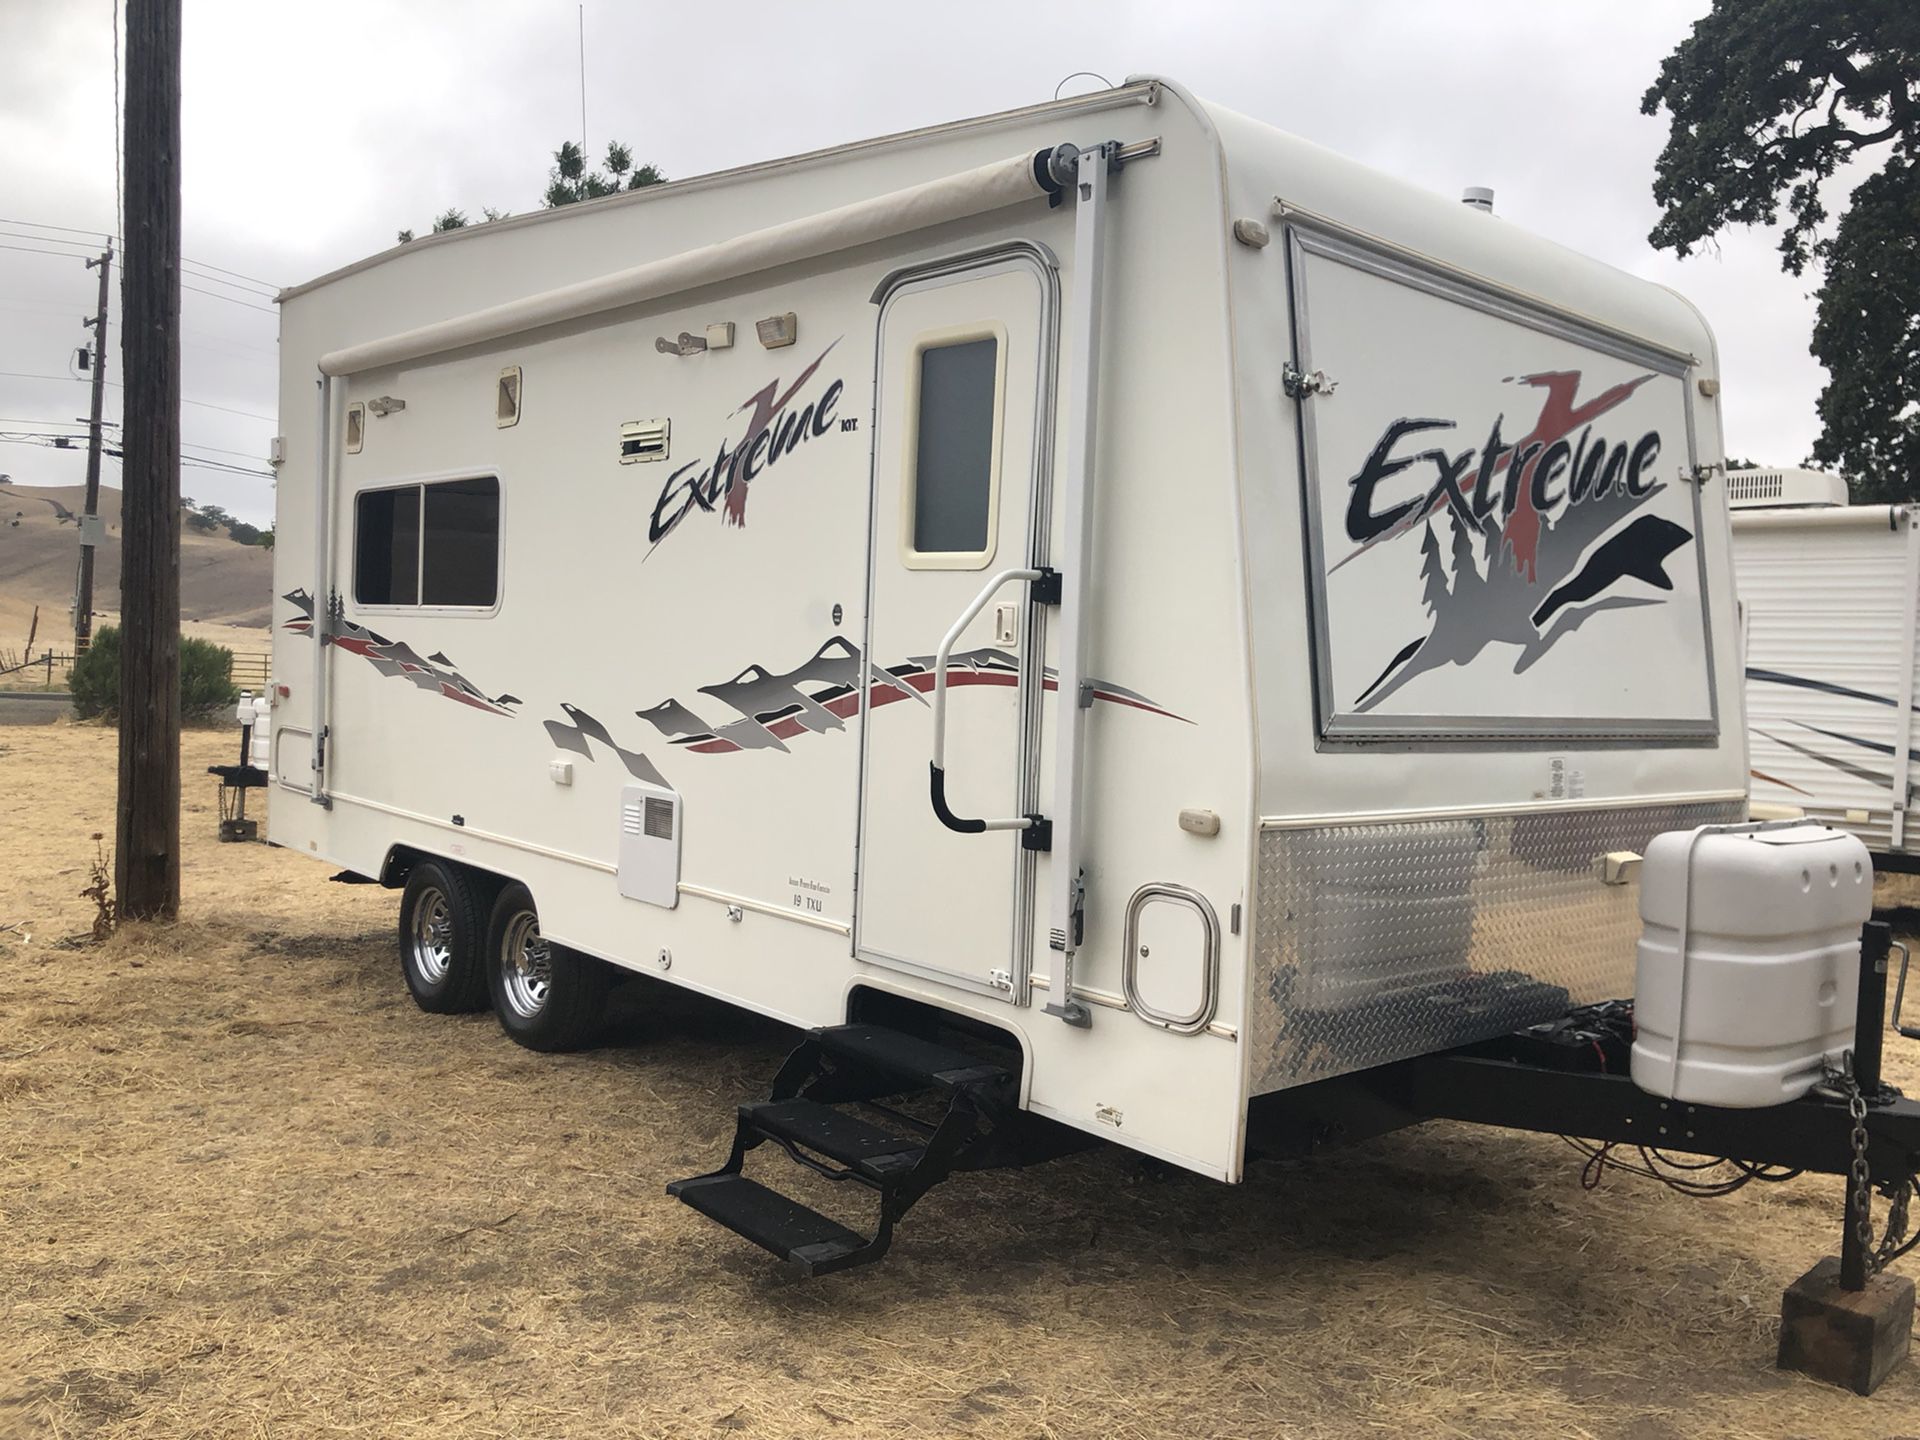 2005 Toy hauler 20FT tip out front sleeps 6 comfortably like new